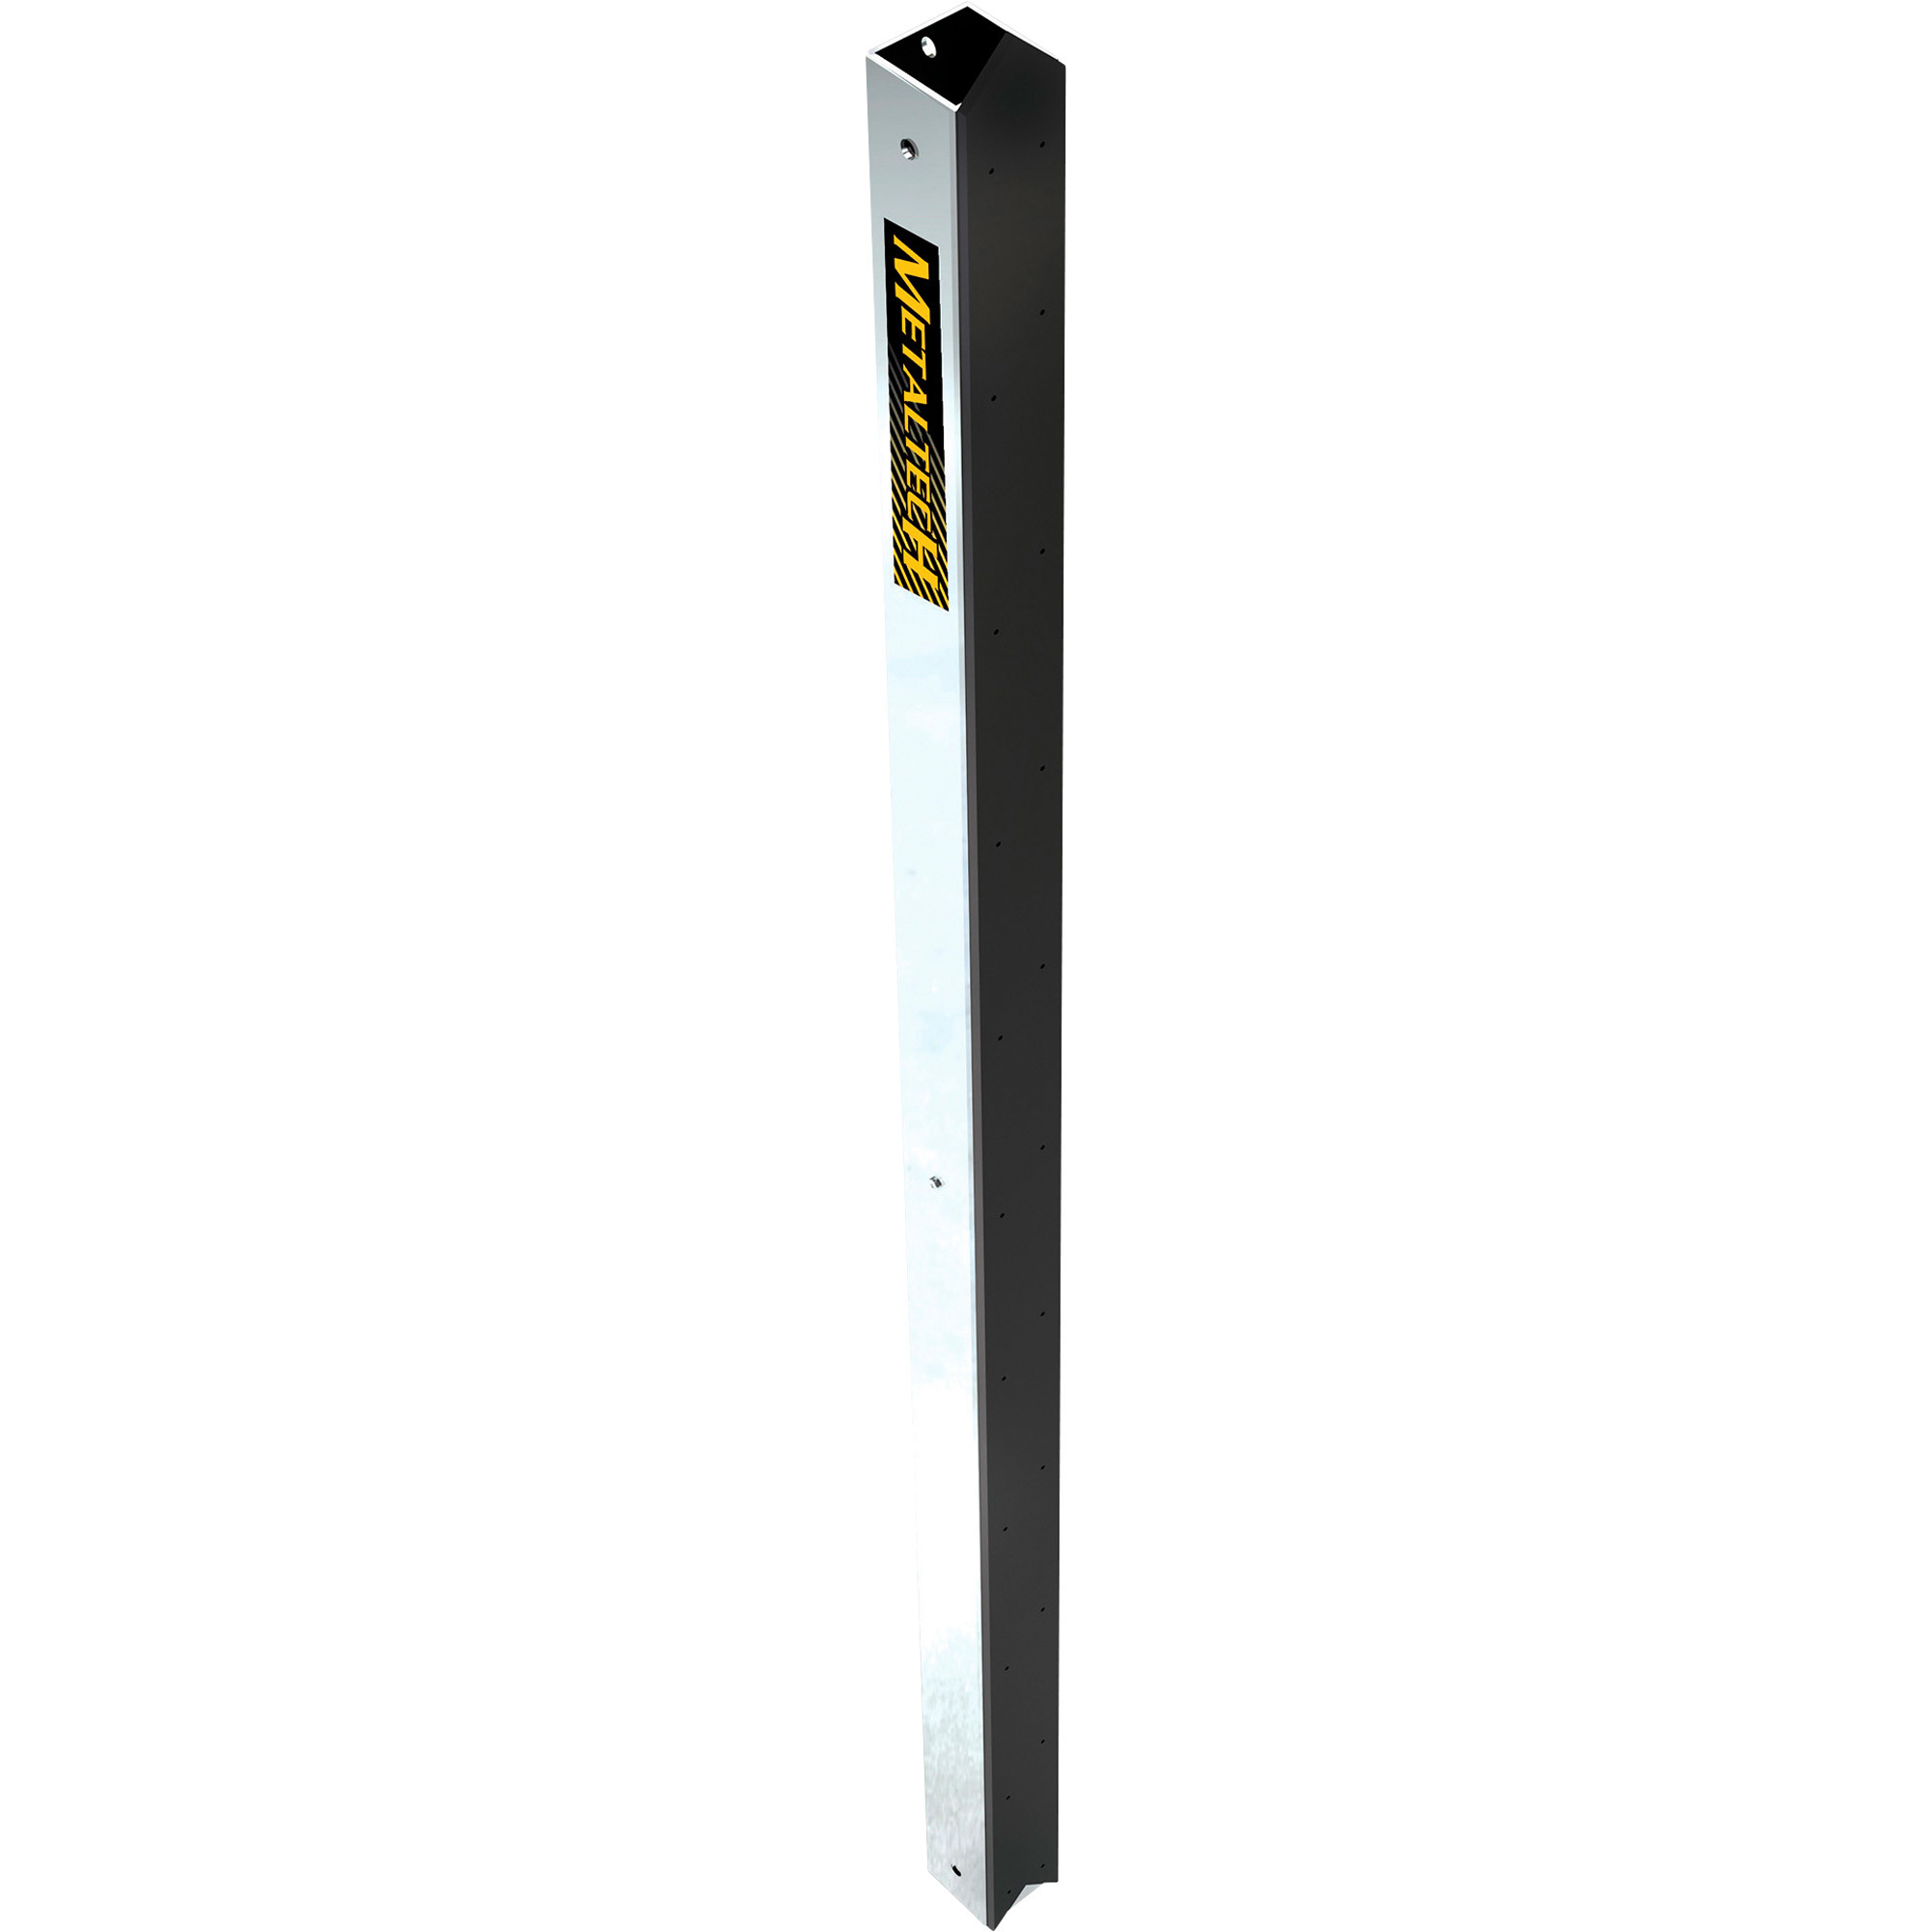 Metaltech 6ft. All Pro Aluminum and Rubber Pole# 3006, Model PJ-PP06